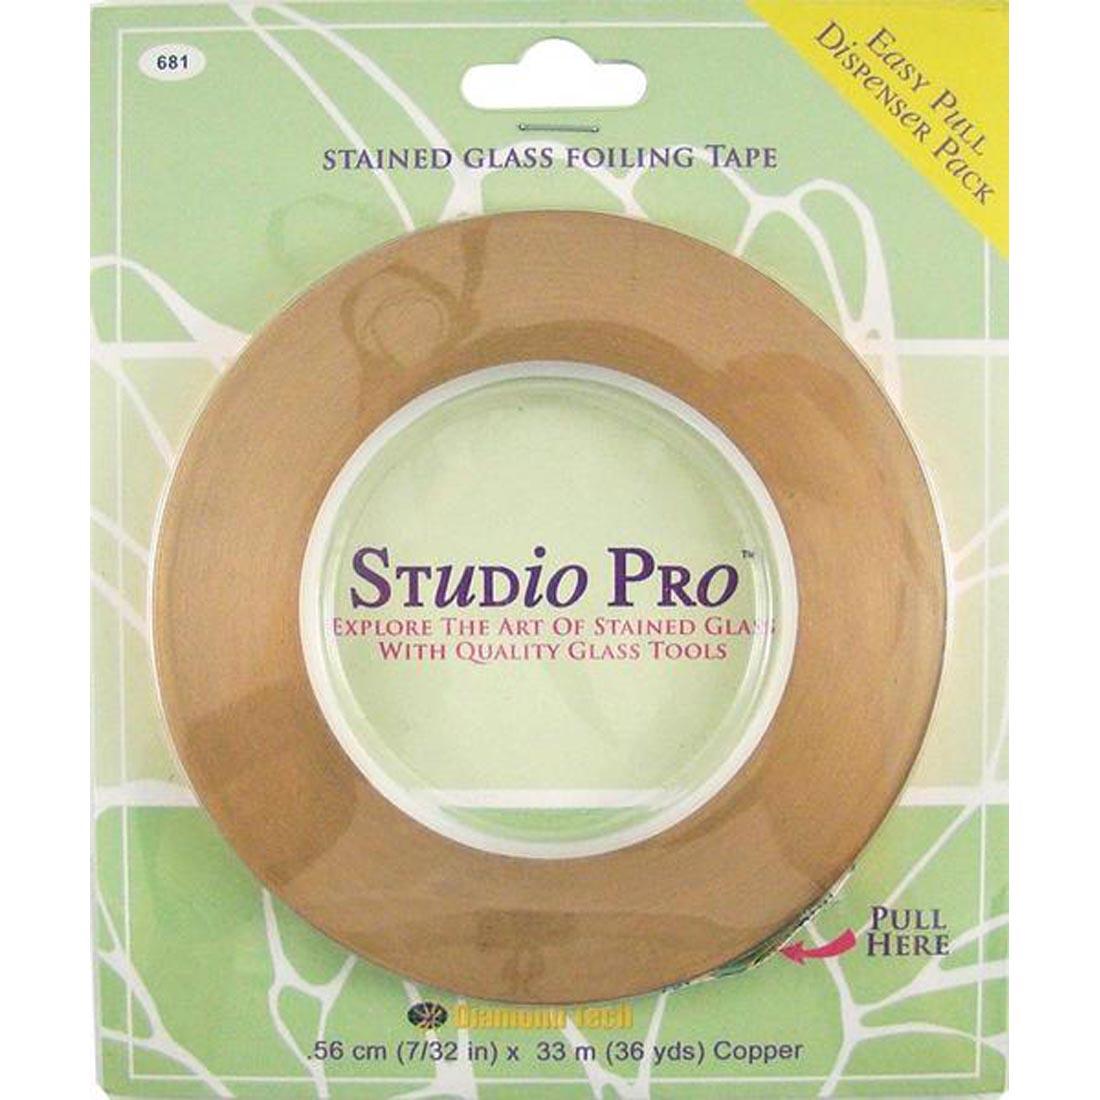 Package of Studio Pro Copper Stained Glass Foiling Tape